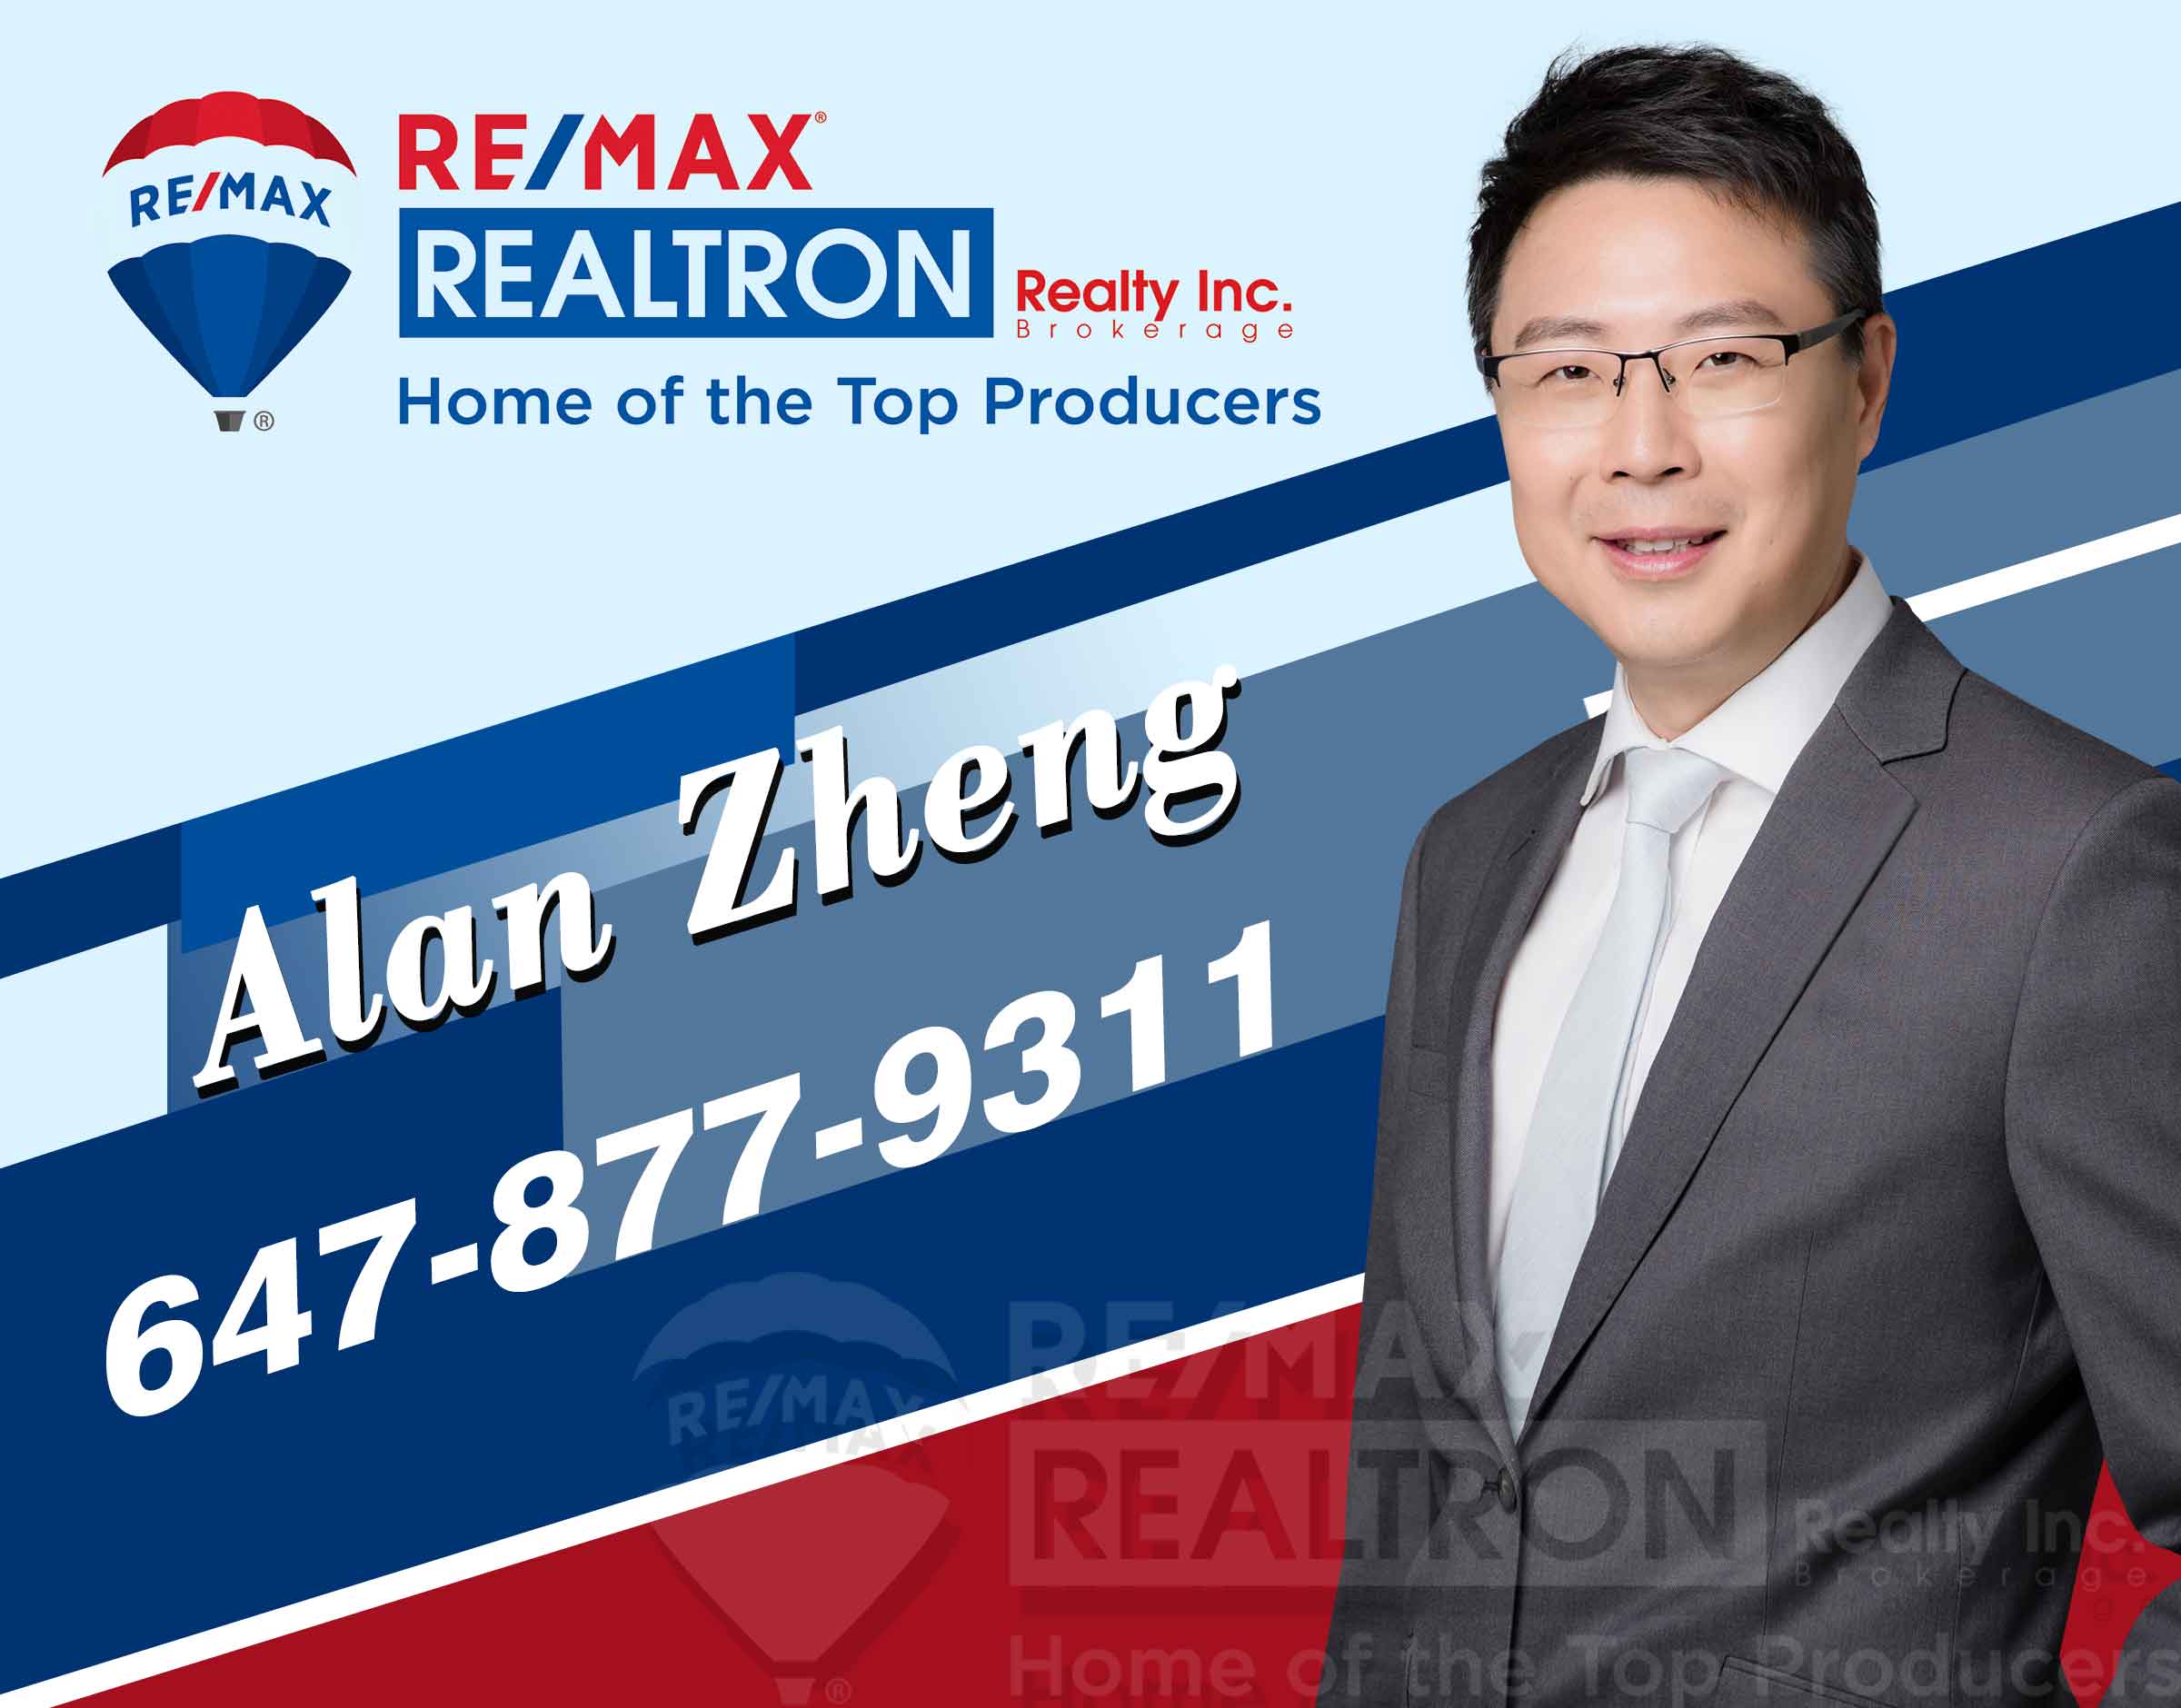 Midtown real estate agent